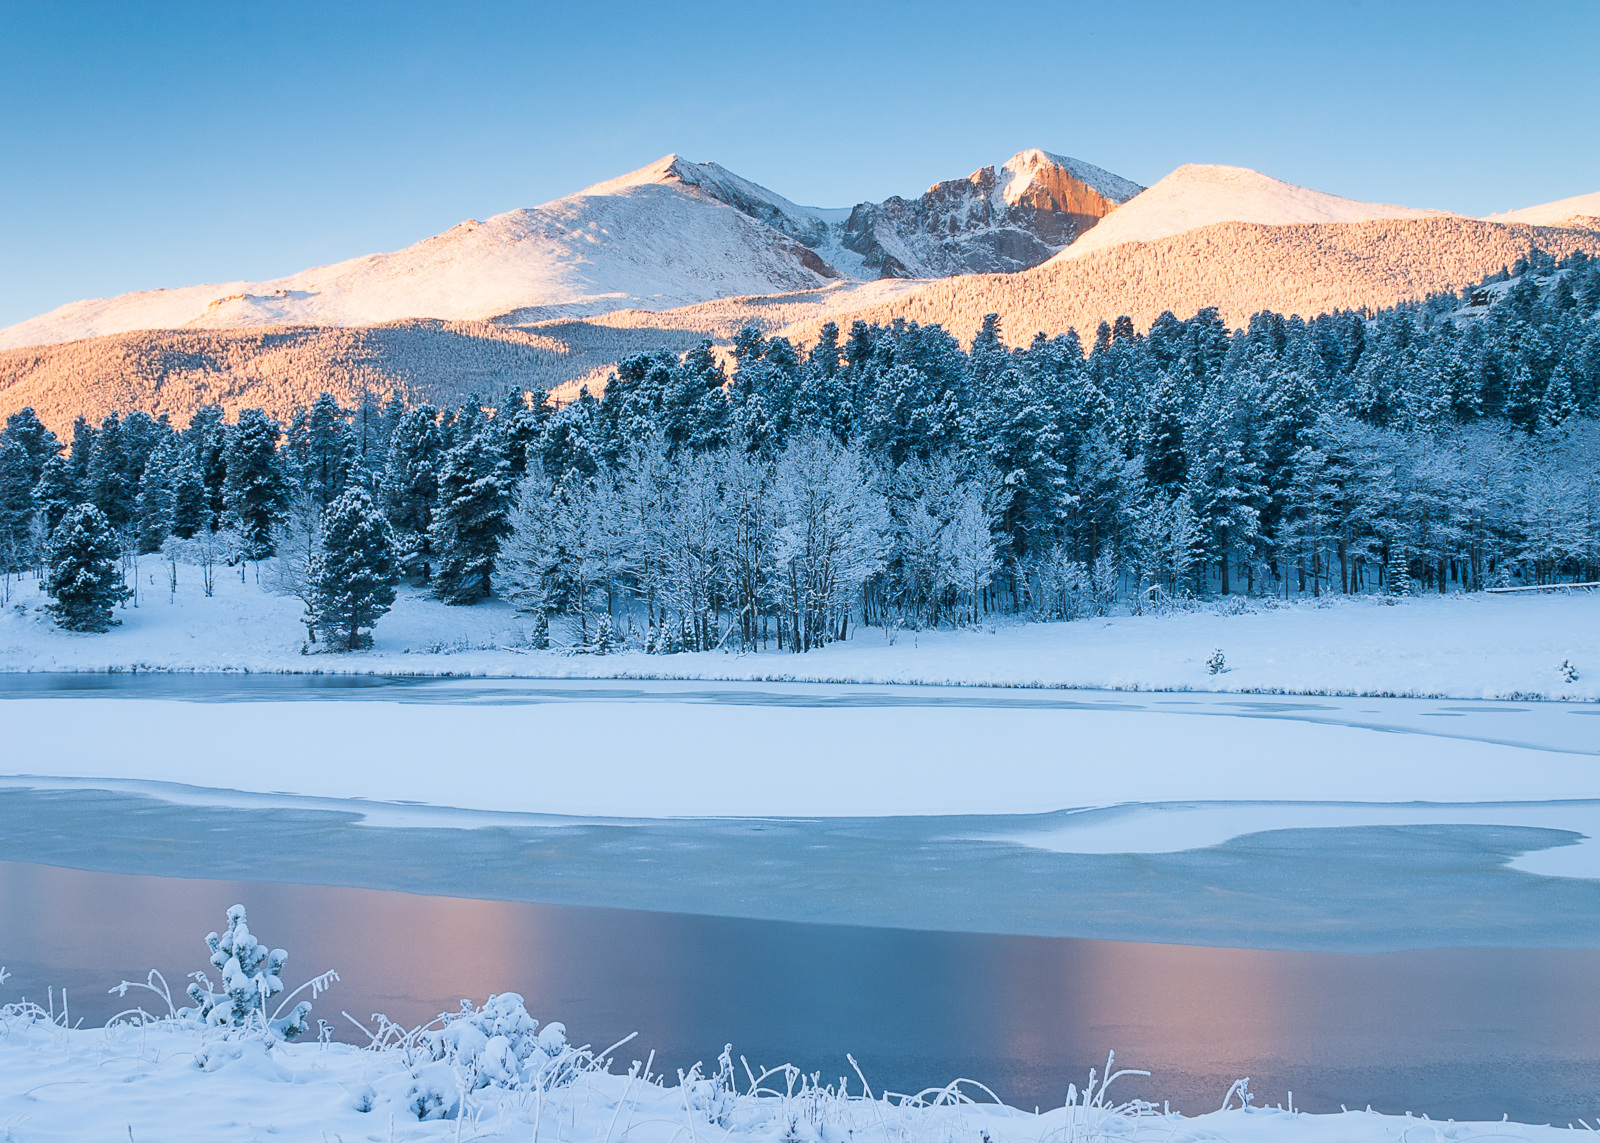 The morning light and a fresh winter snow bring a fresh view to Longs Peak and Mount Meeker.